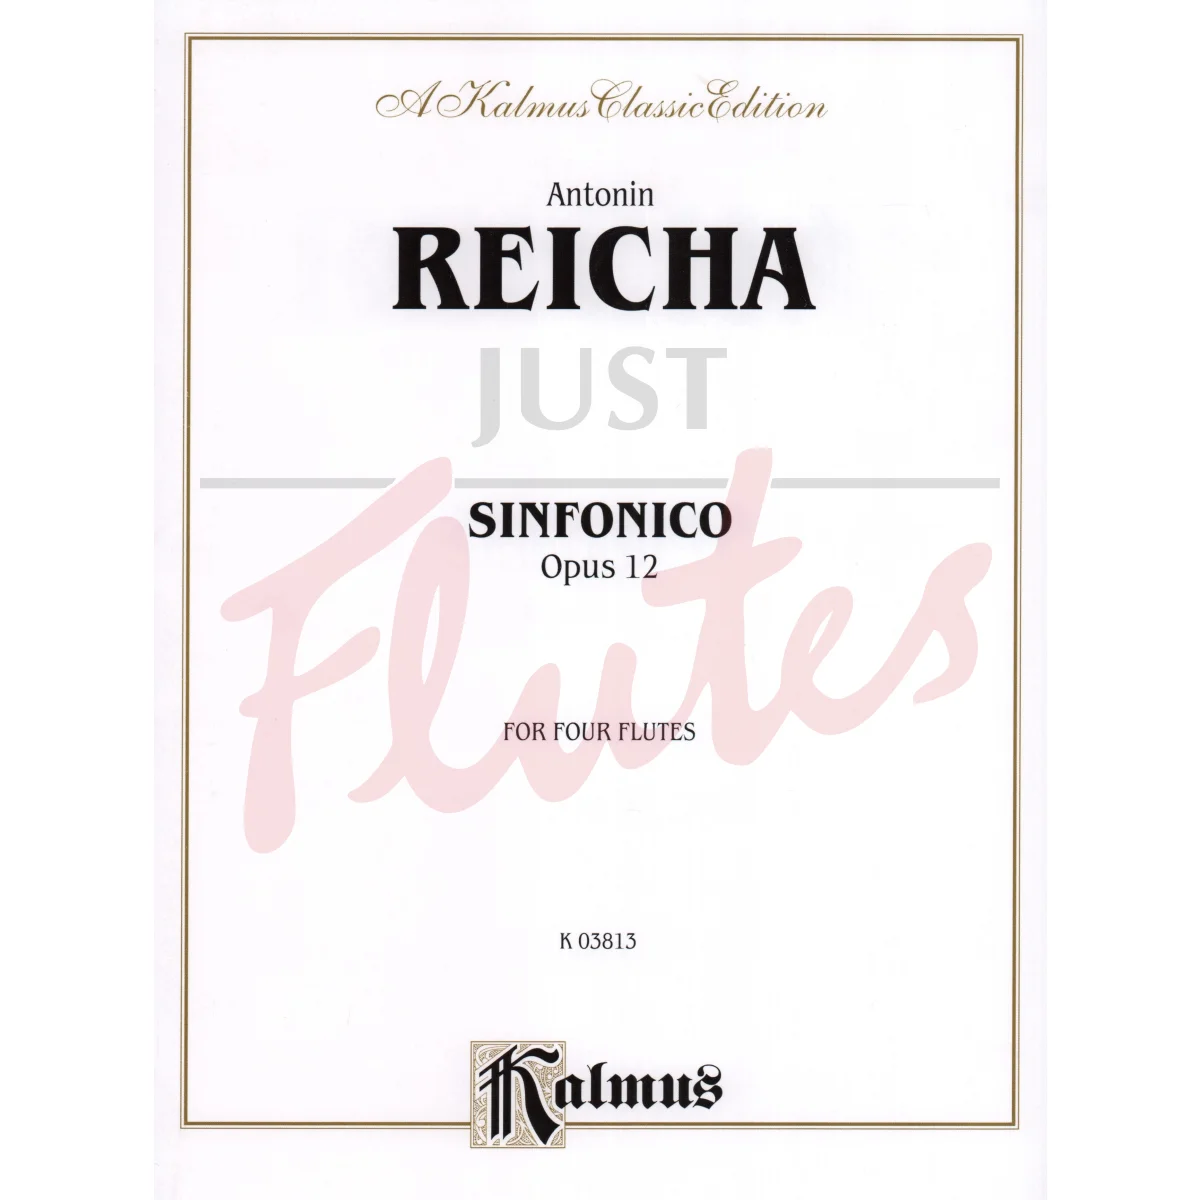 Sinfonico for Four Flutes